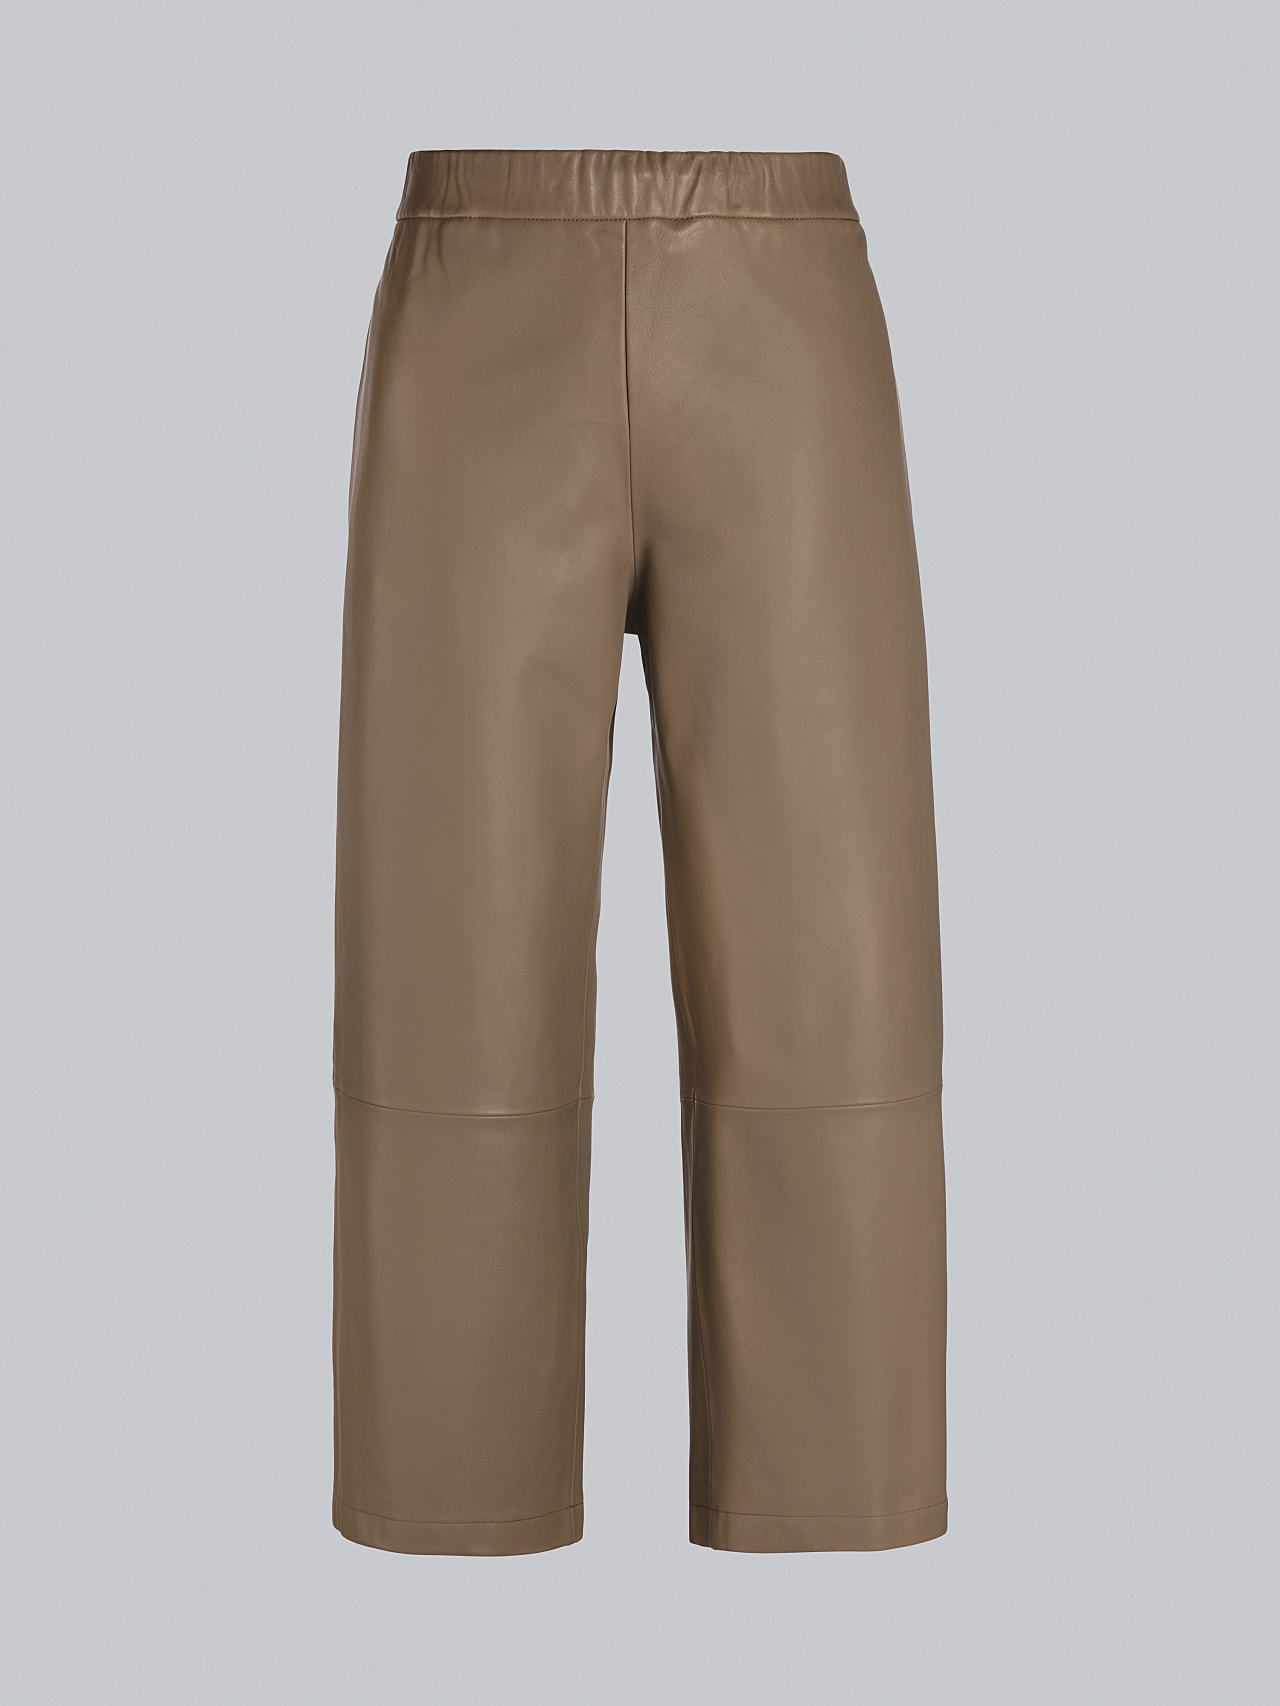 AlphaTauri | LANIA V1.Y5.02 | Leather Culottes in gold for Women